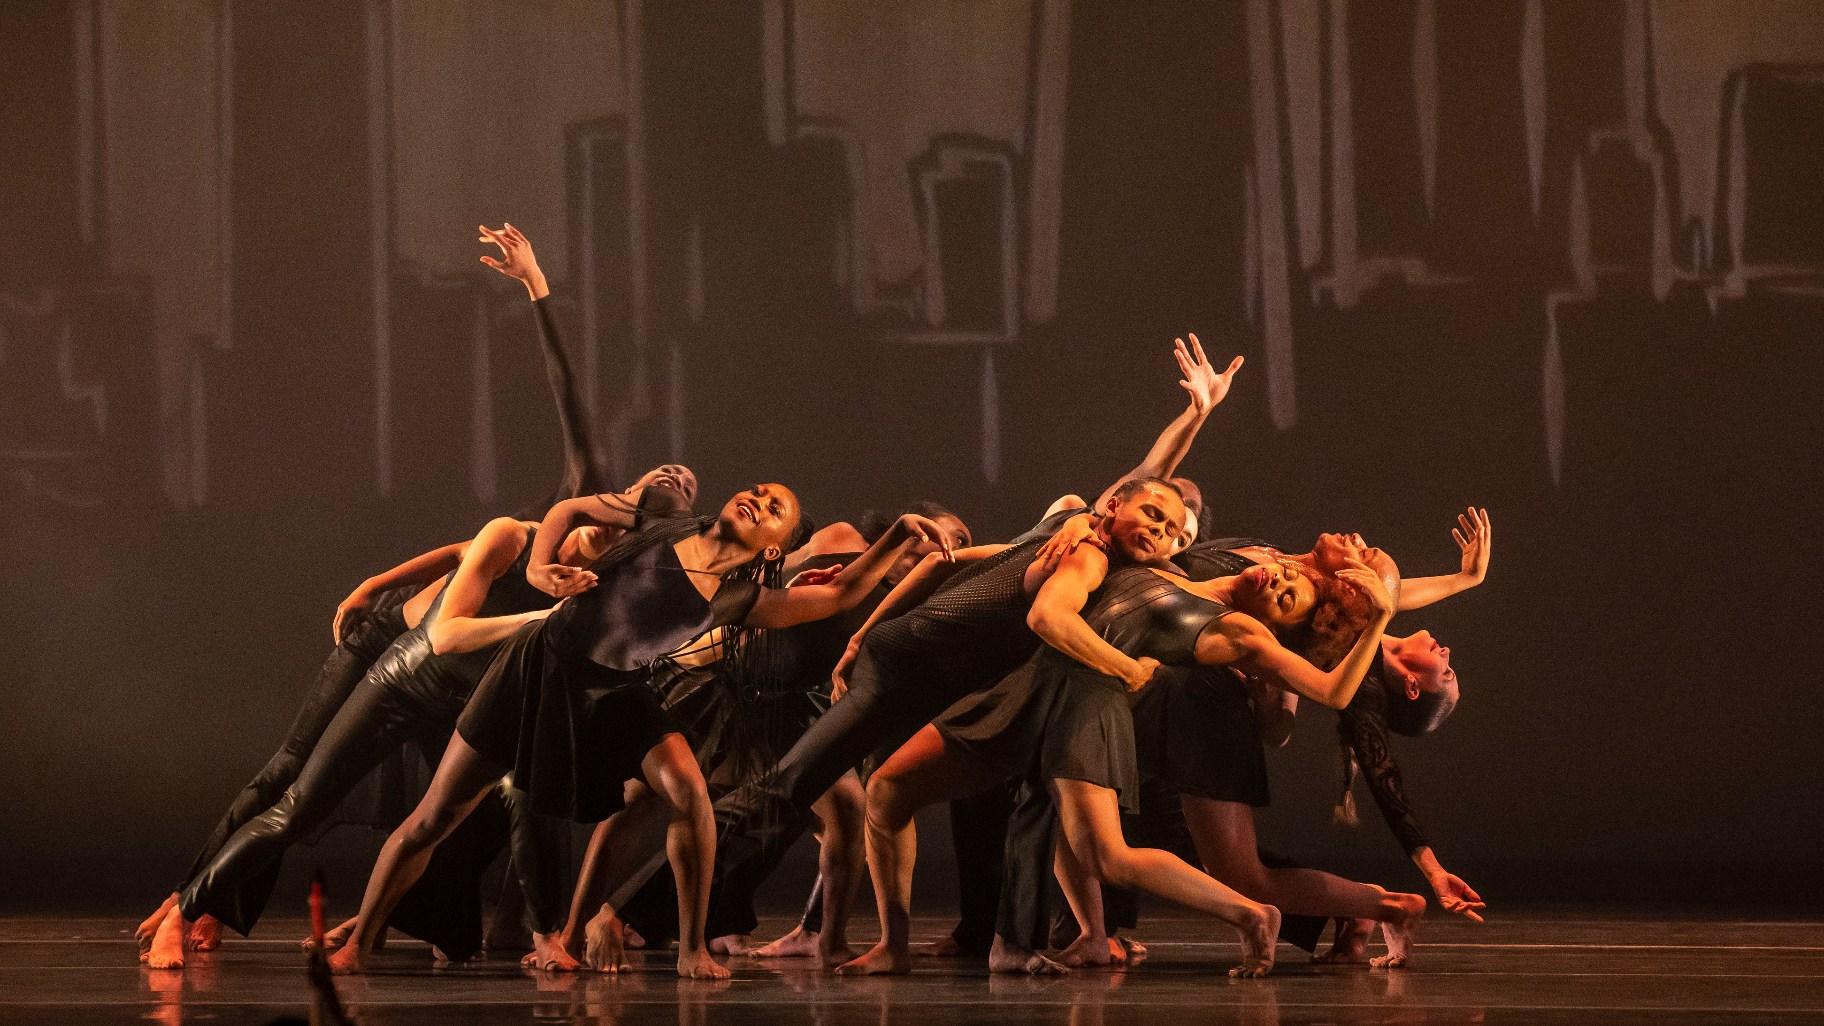 Deeply Rooted Dance Theater dancers perform “Q After Dark.” (Credit: Todd Rosenberg)